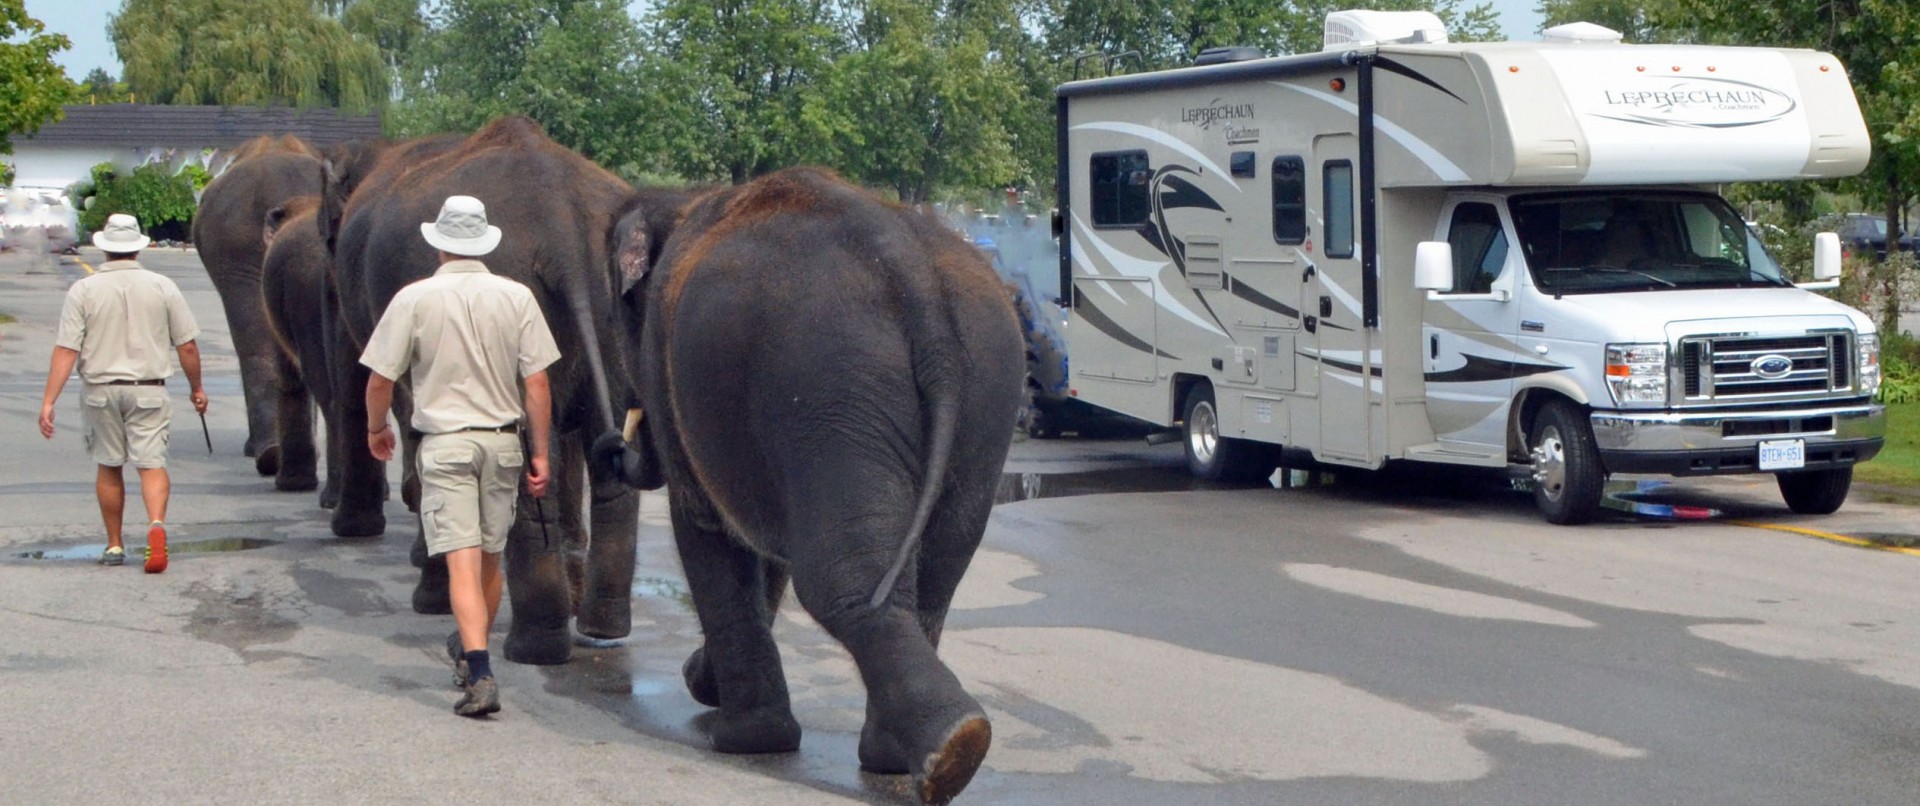 Elephants and RV at African Lion Safari